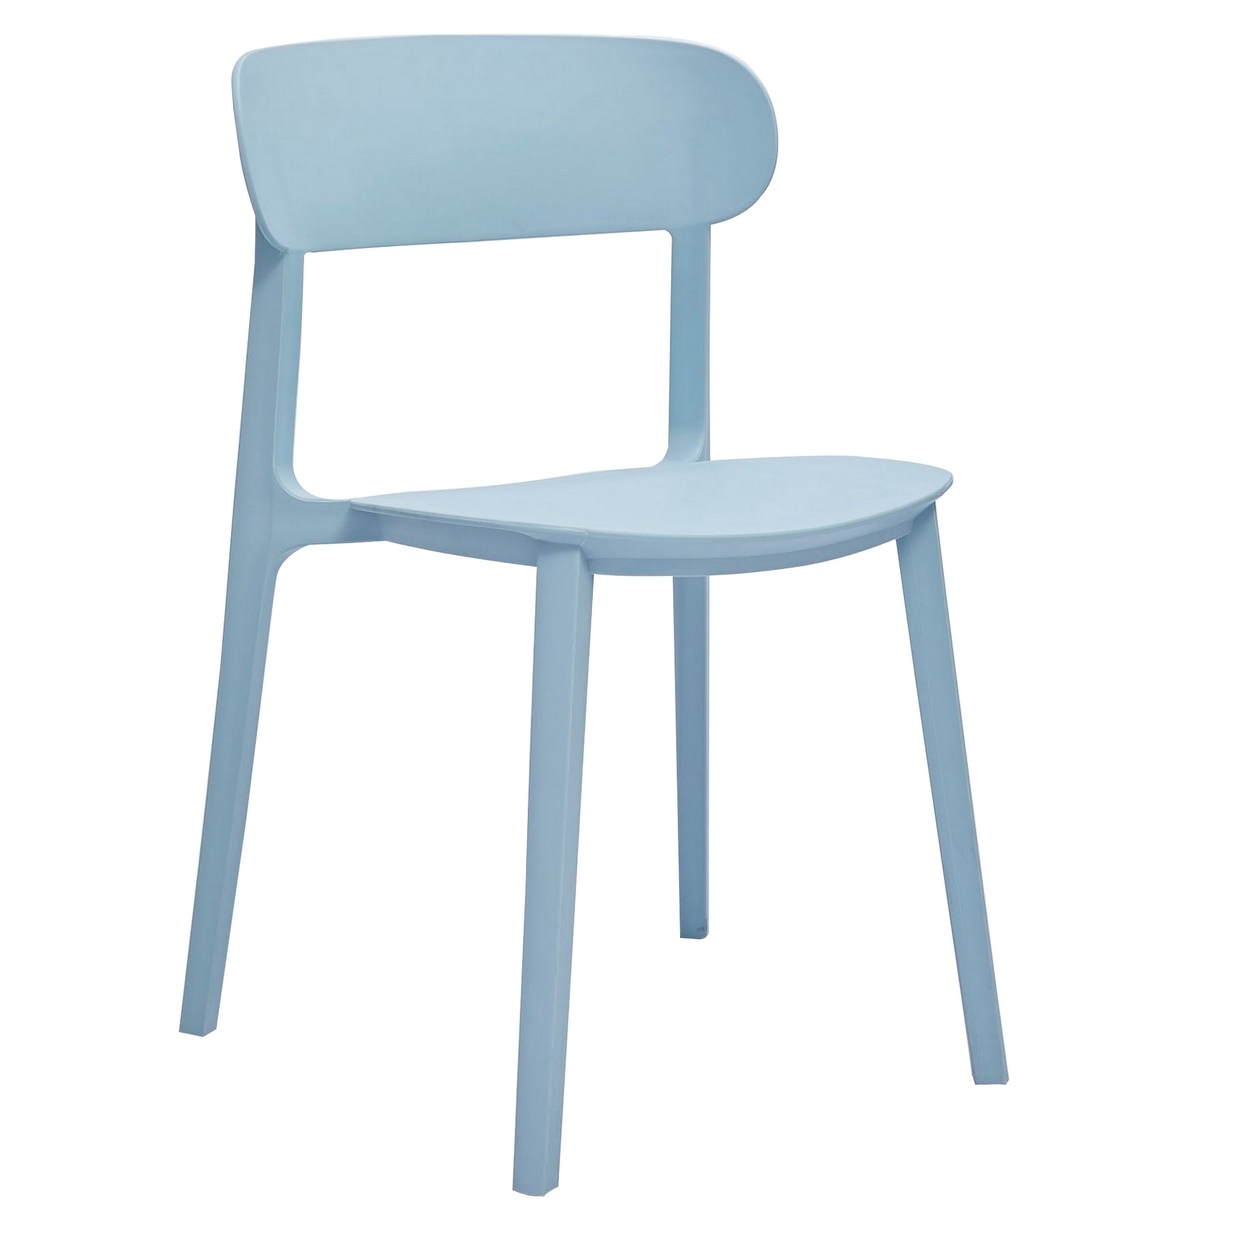 Qin 20 Inch Dining Side Chair, Set Of 4, Contoured Back, Curved Seat, Blue- Saltoro Sherpi